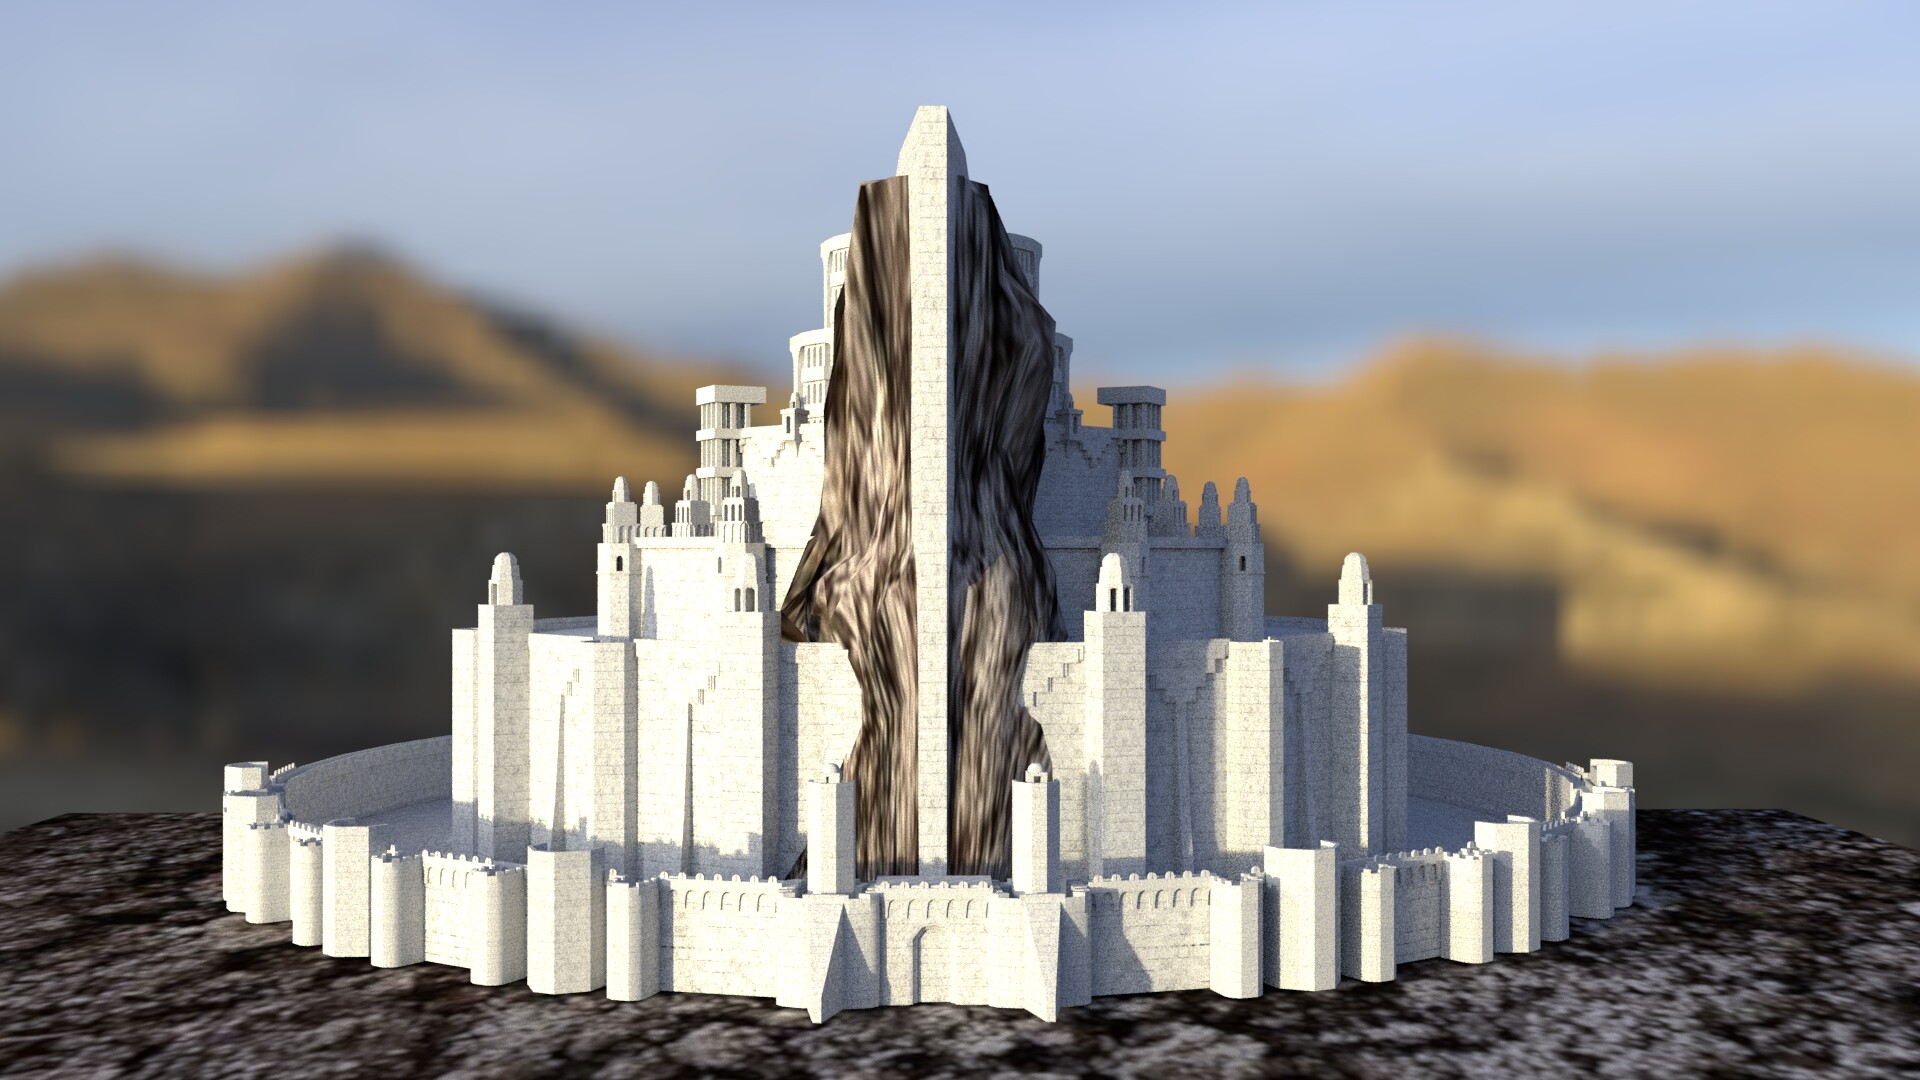 ArtStation - MONT ST. MICHEL - The real life MINAS TIRITH